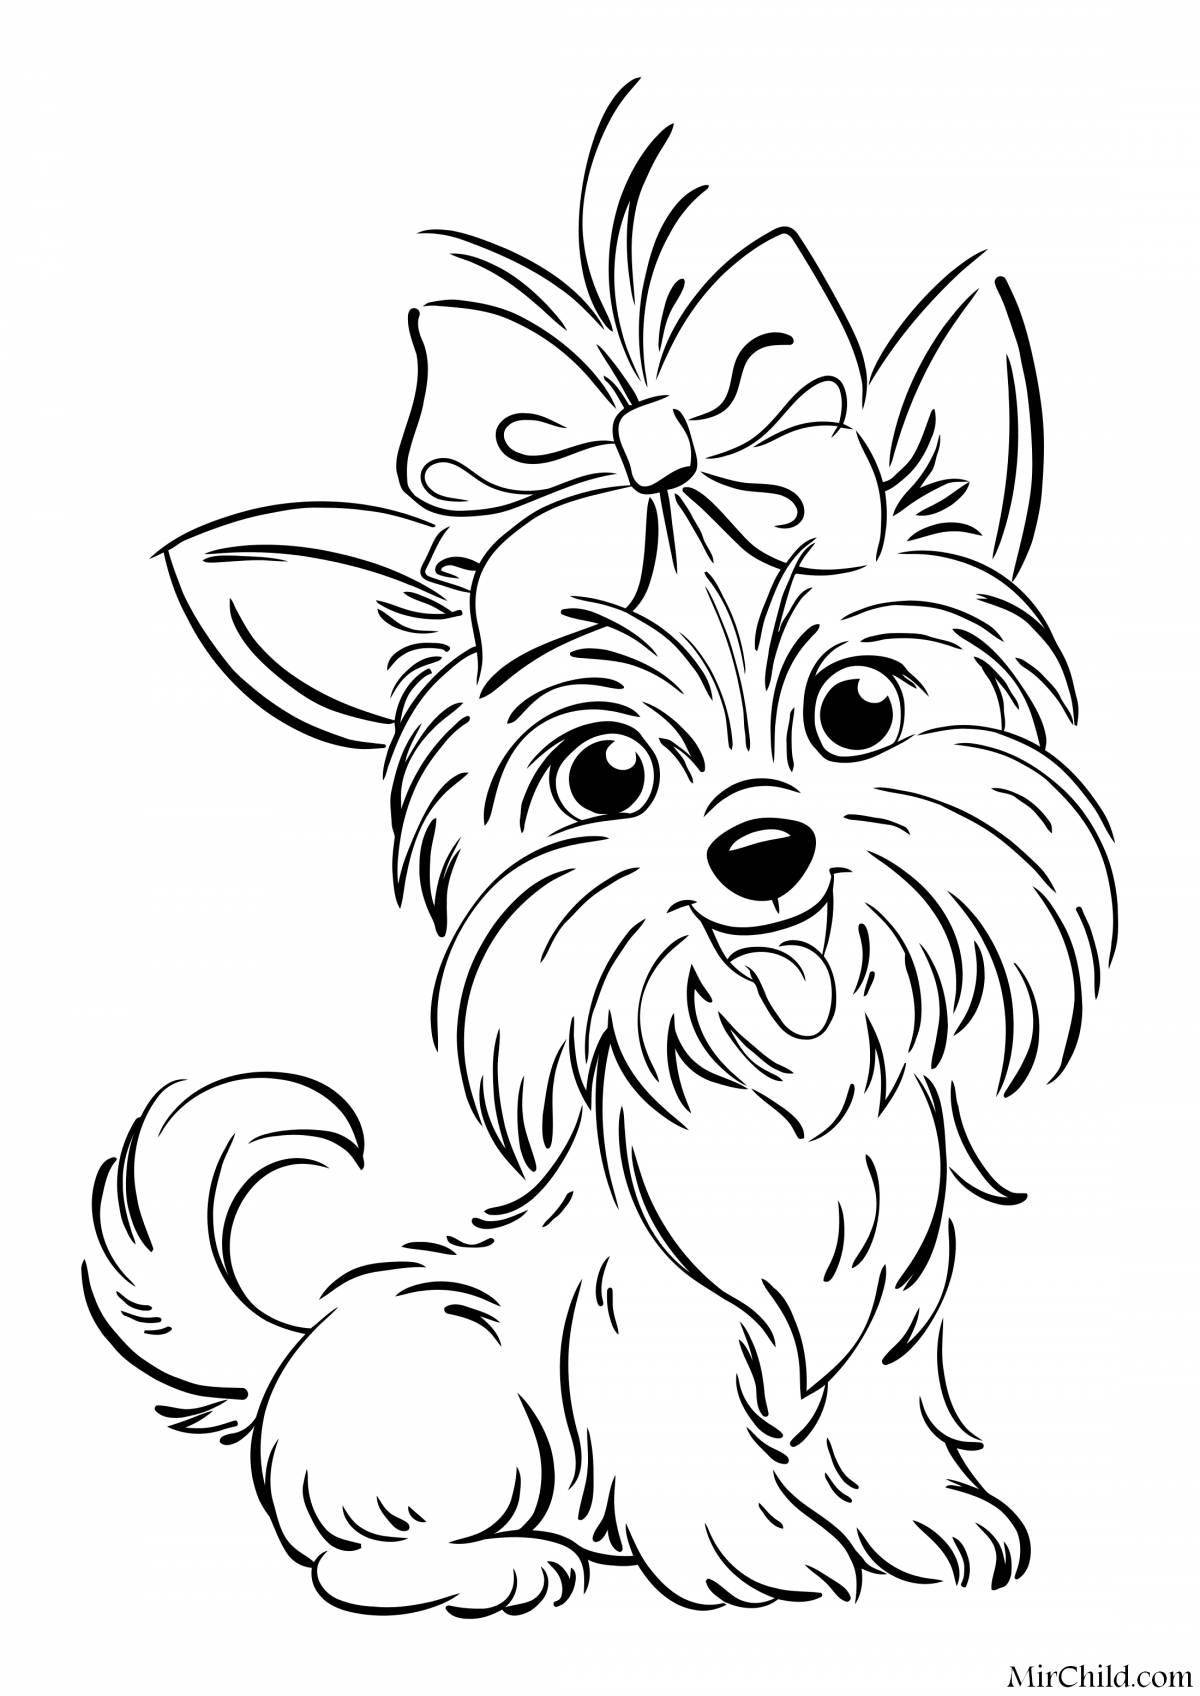 Coloring page blissful dog